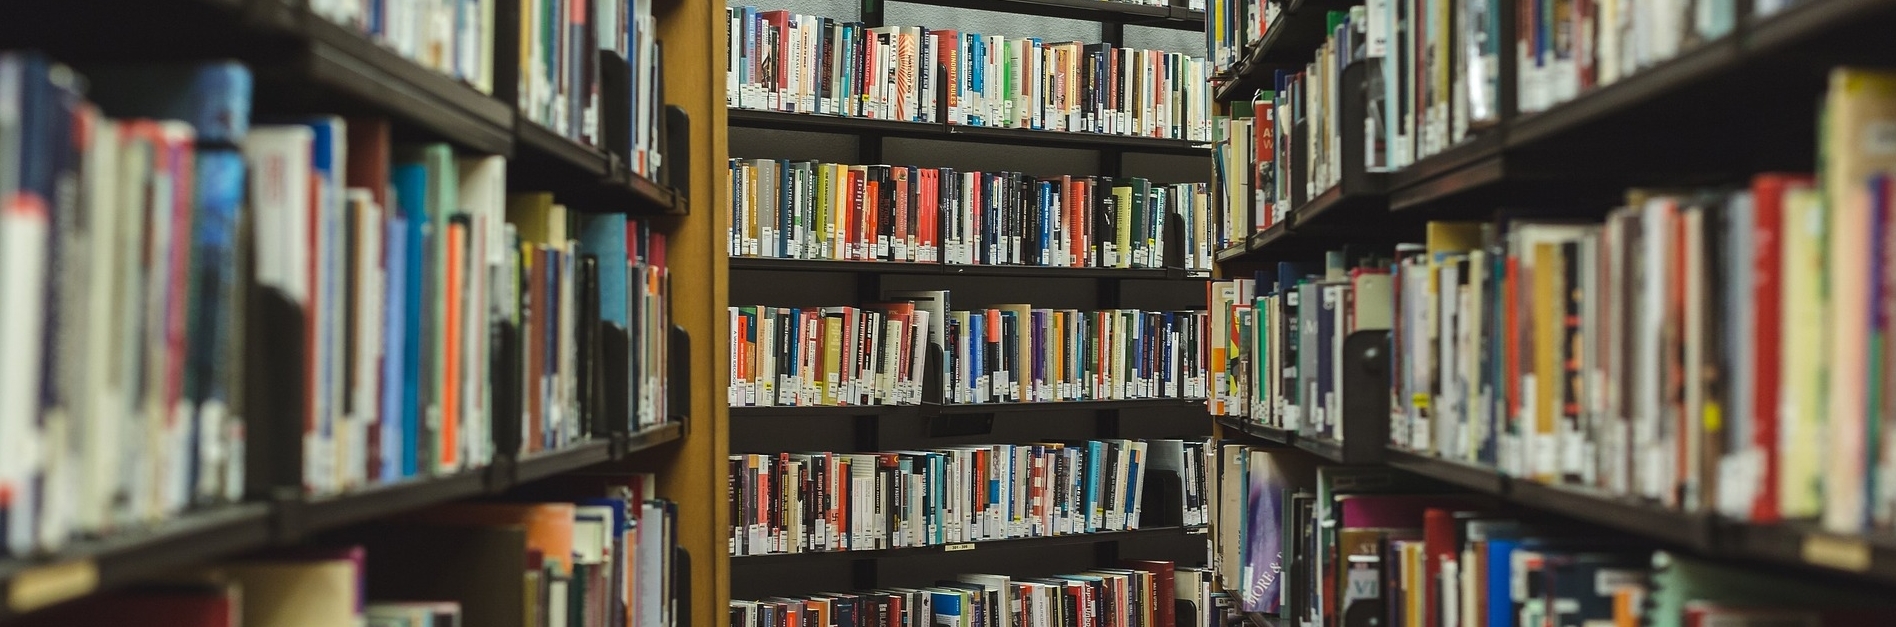 Image of bookshelves crammed with books.